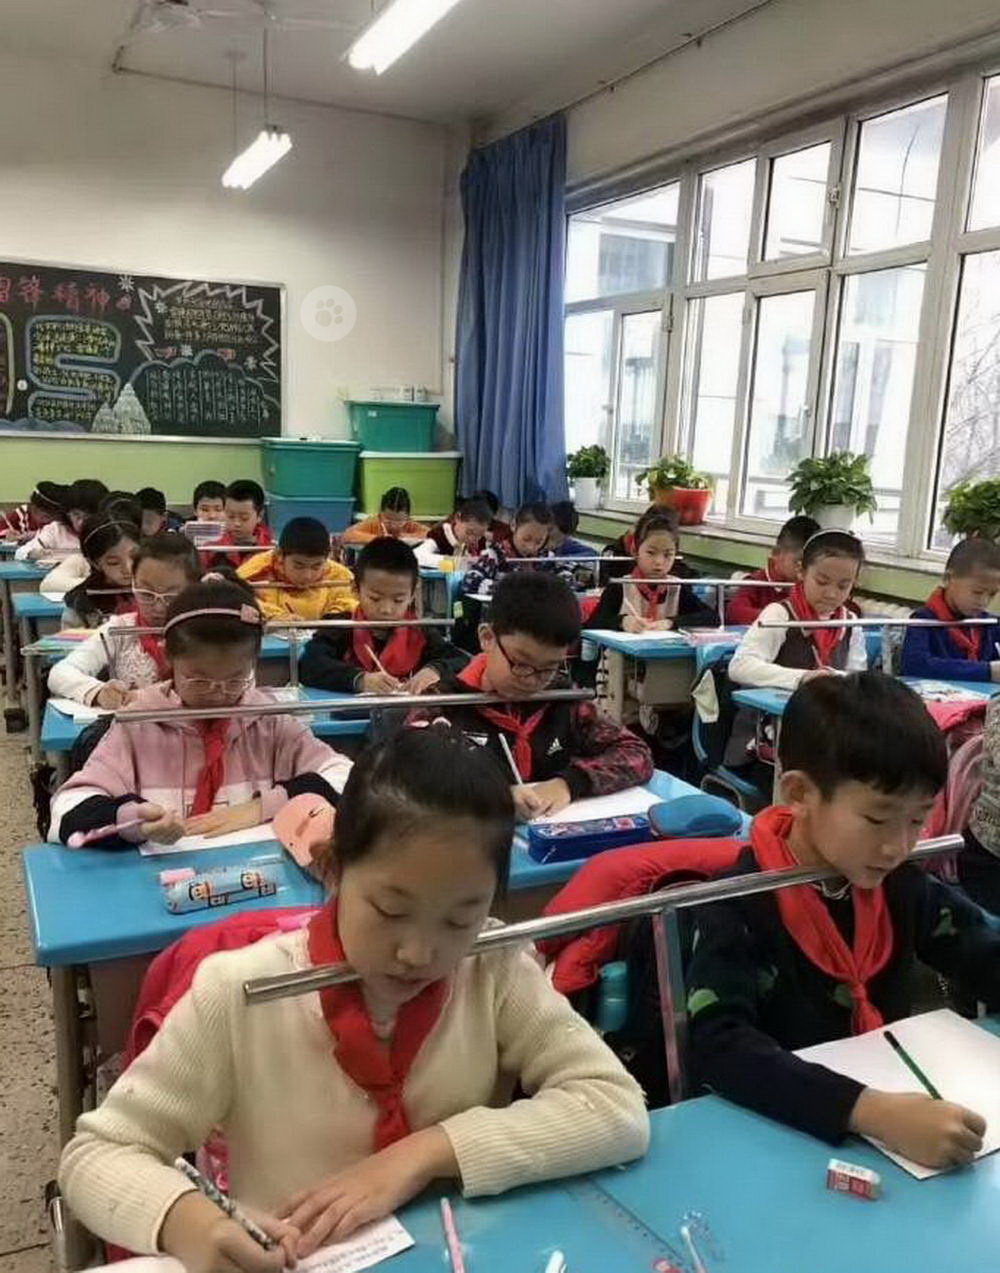 remarkable image of children having their heads kept straight while writing